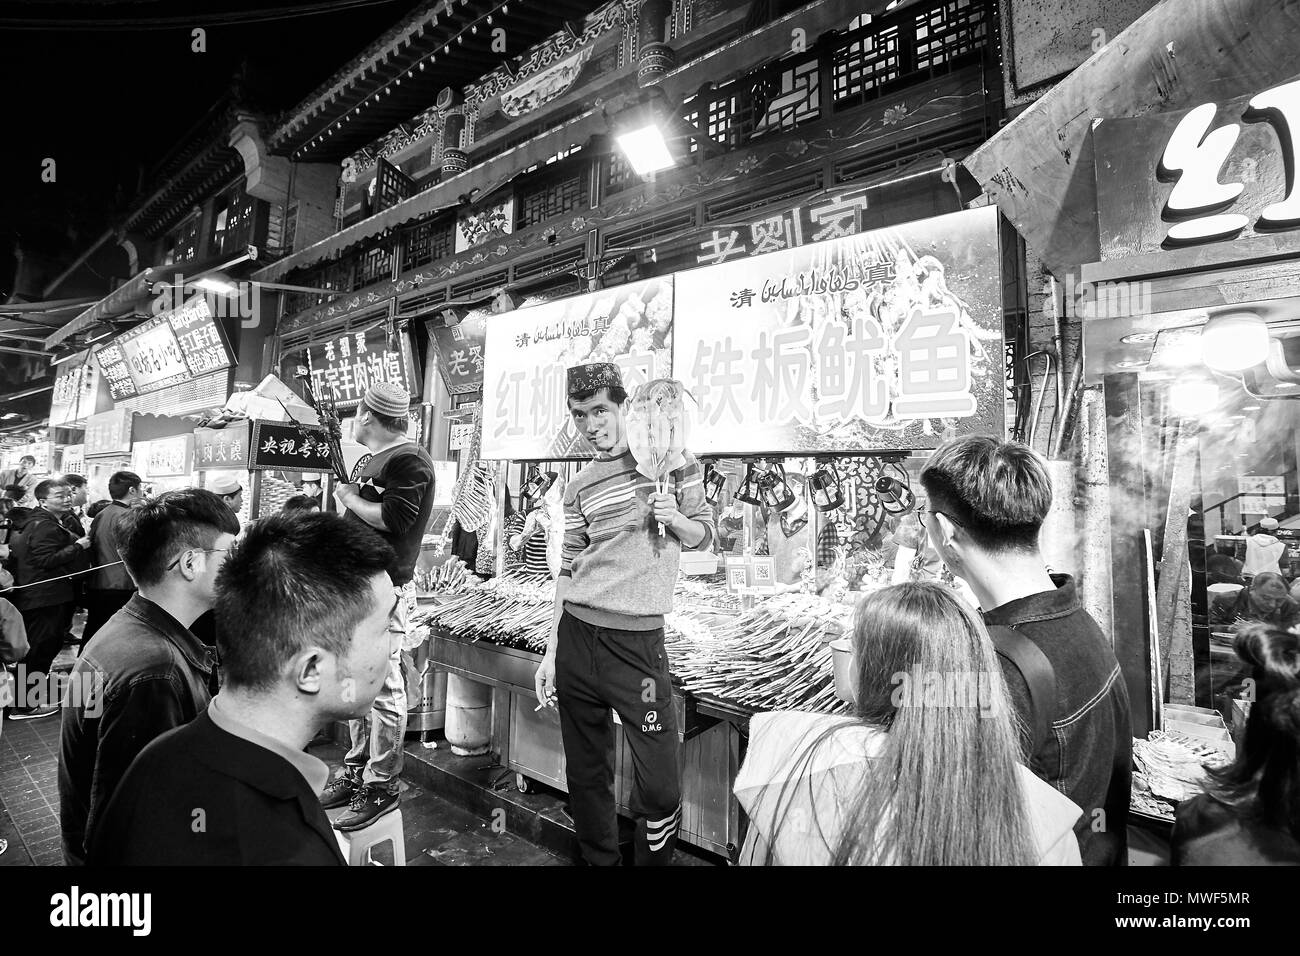 Xian, China - October 5, 2017: Street food vendor at the Muslim Quarter, well-known tourism site famous for its culture and food. Stock Photo